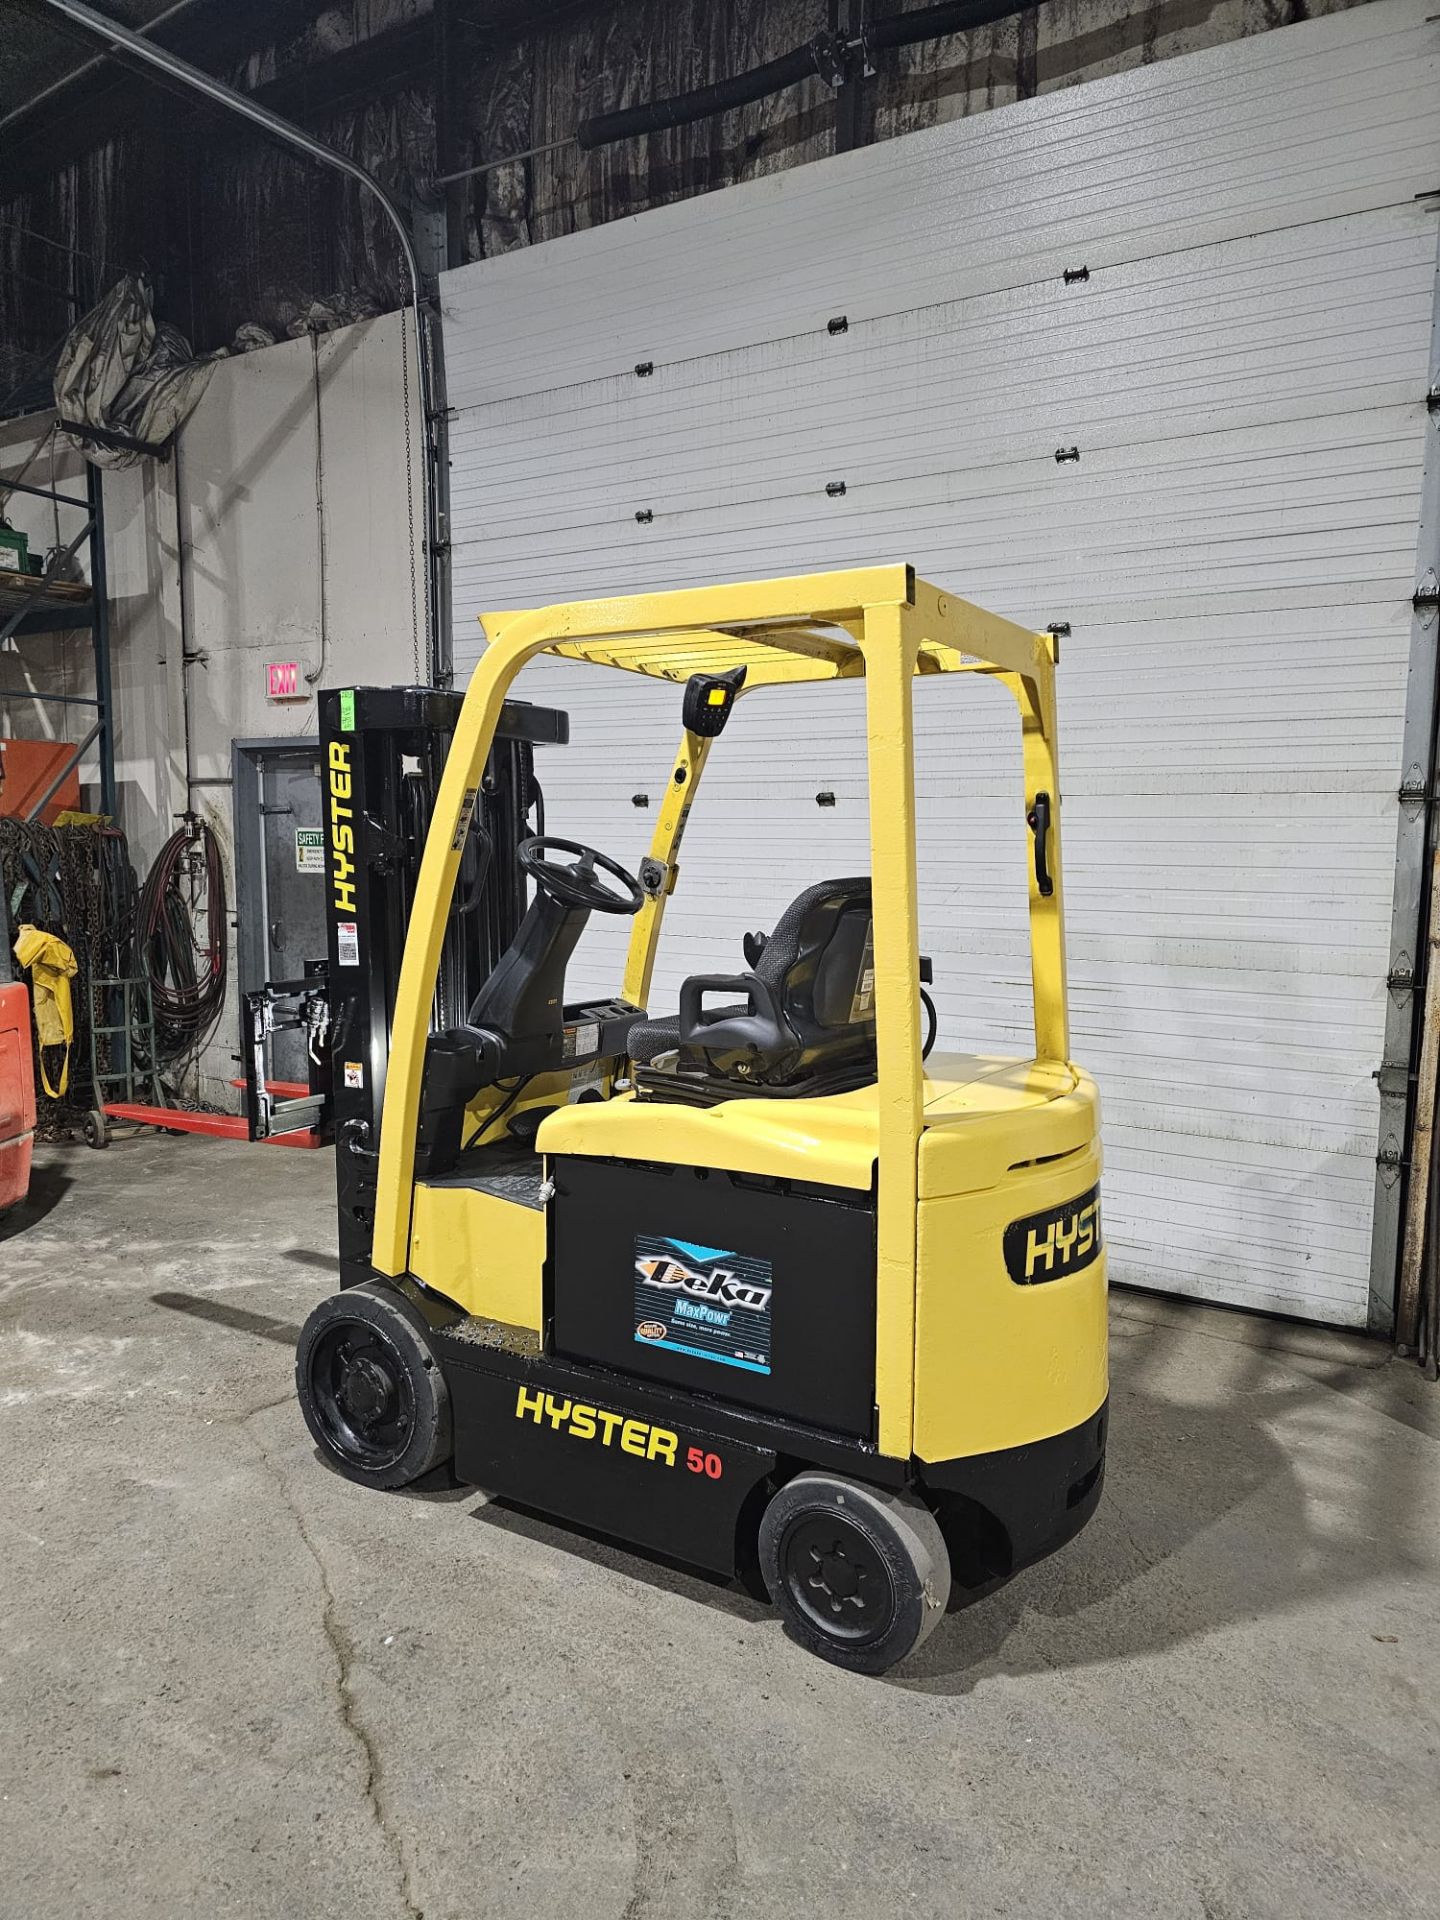 2014 Hyster 5,000lbs Forklift Electric 48V with 3-STAGE Mast & Sideshift - 4-way Control with - Image 3 of 6